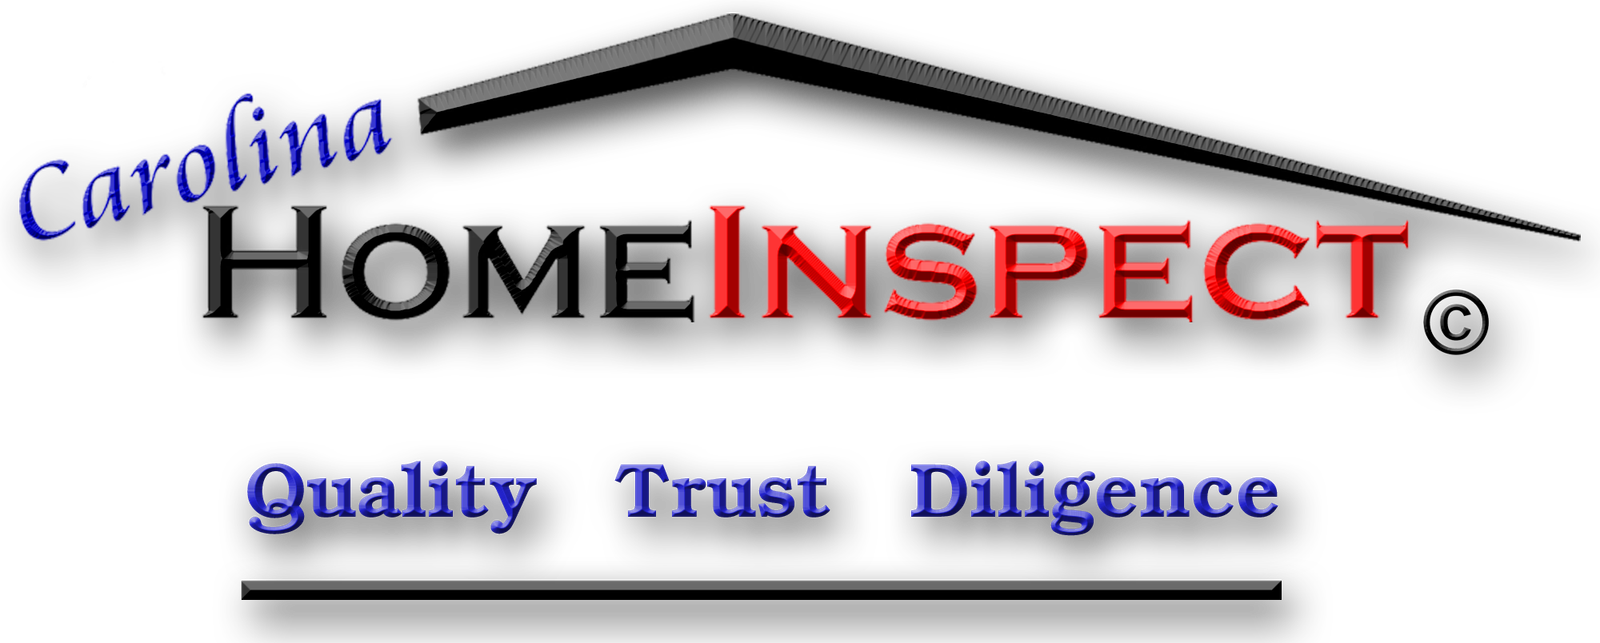 Home inspector in the York, Rock Hill, Lancaster, Indian Land, Fort Mill, Tega Cay and Chester, SC areas.